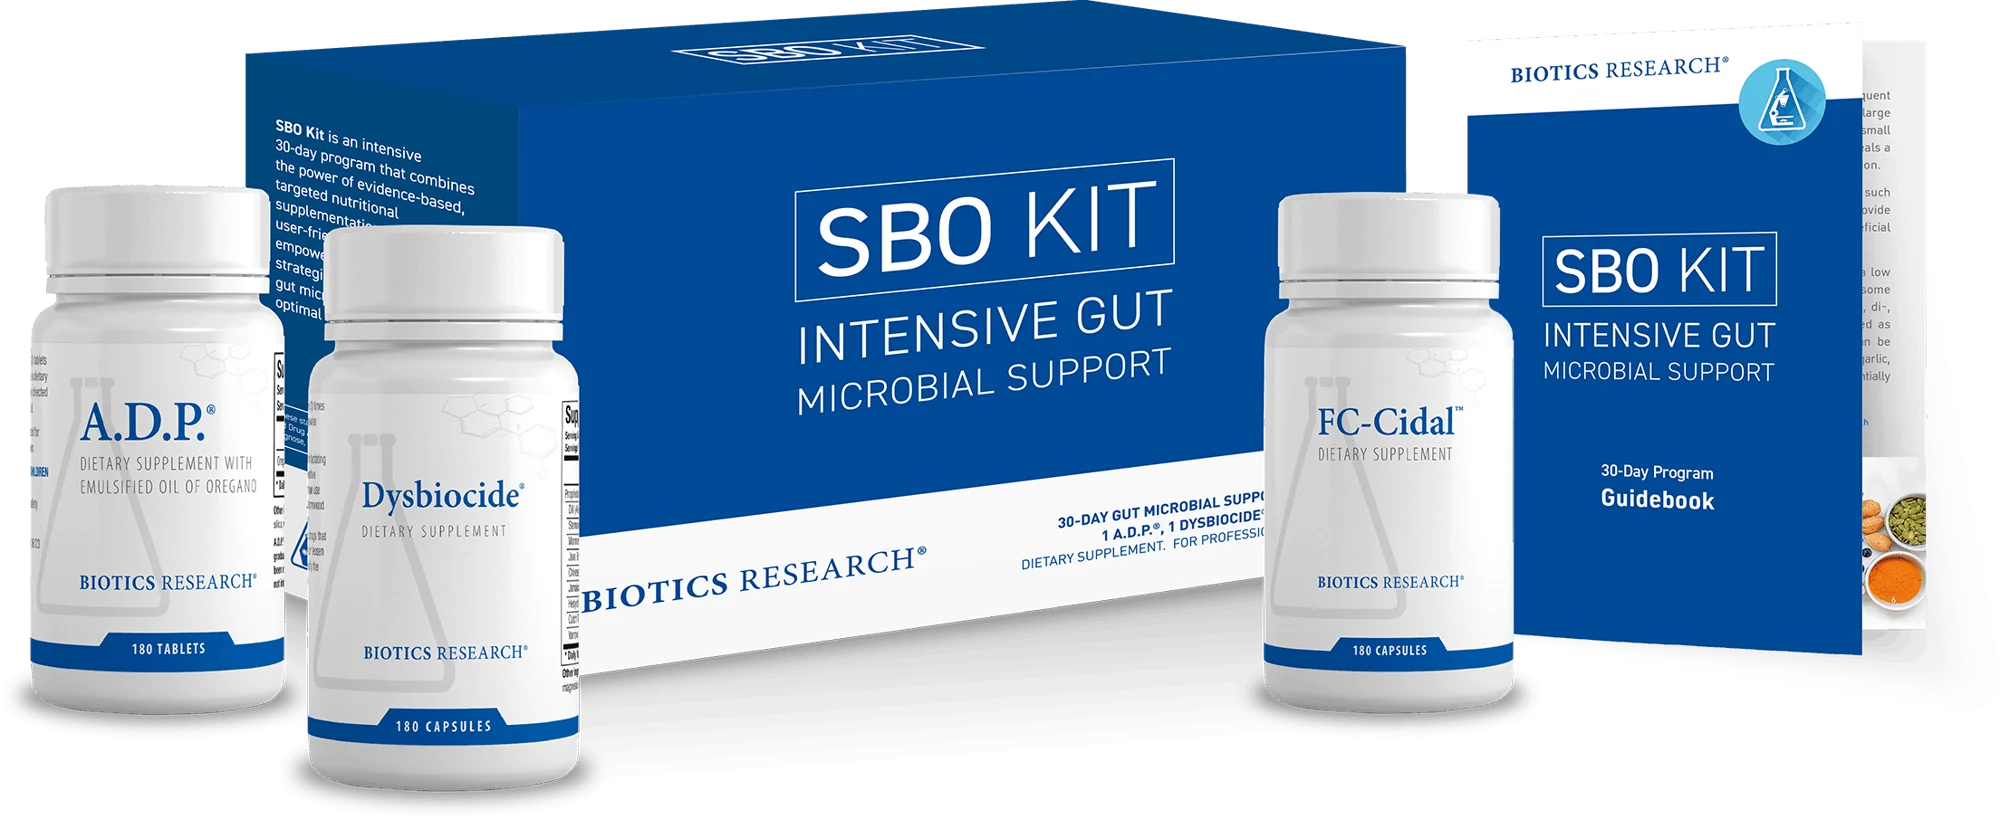 SBO Kit - NEW!!! (Intensive Gut Microbial Support) 30 day kit